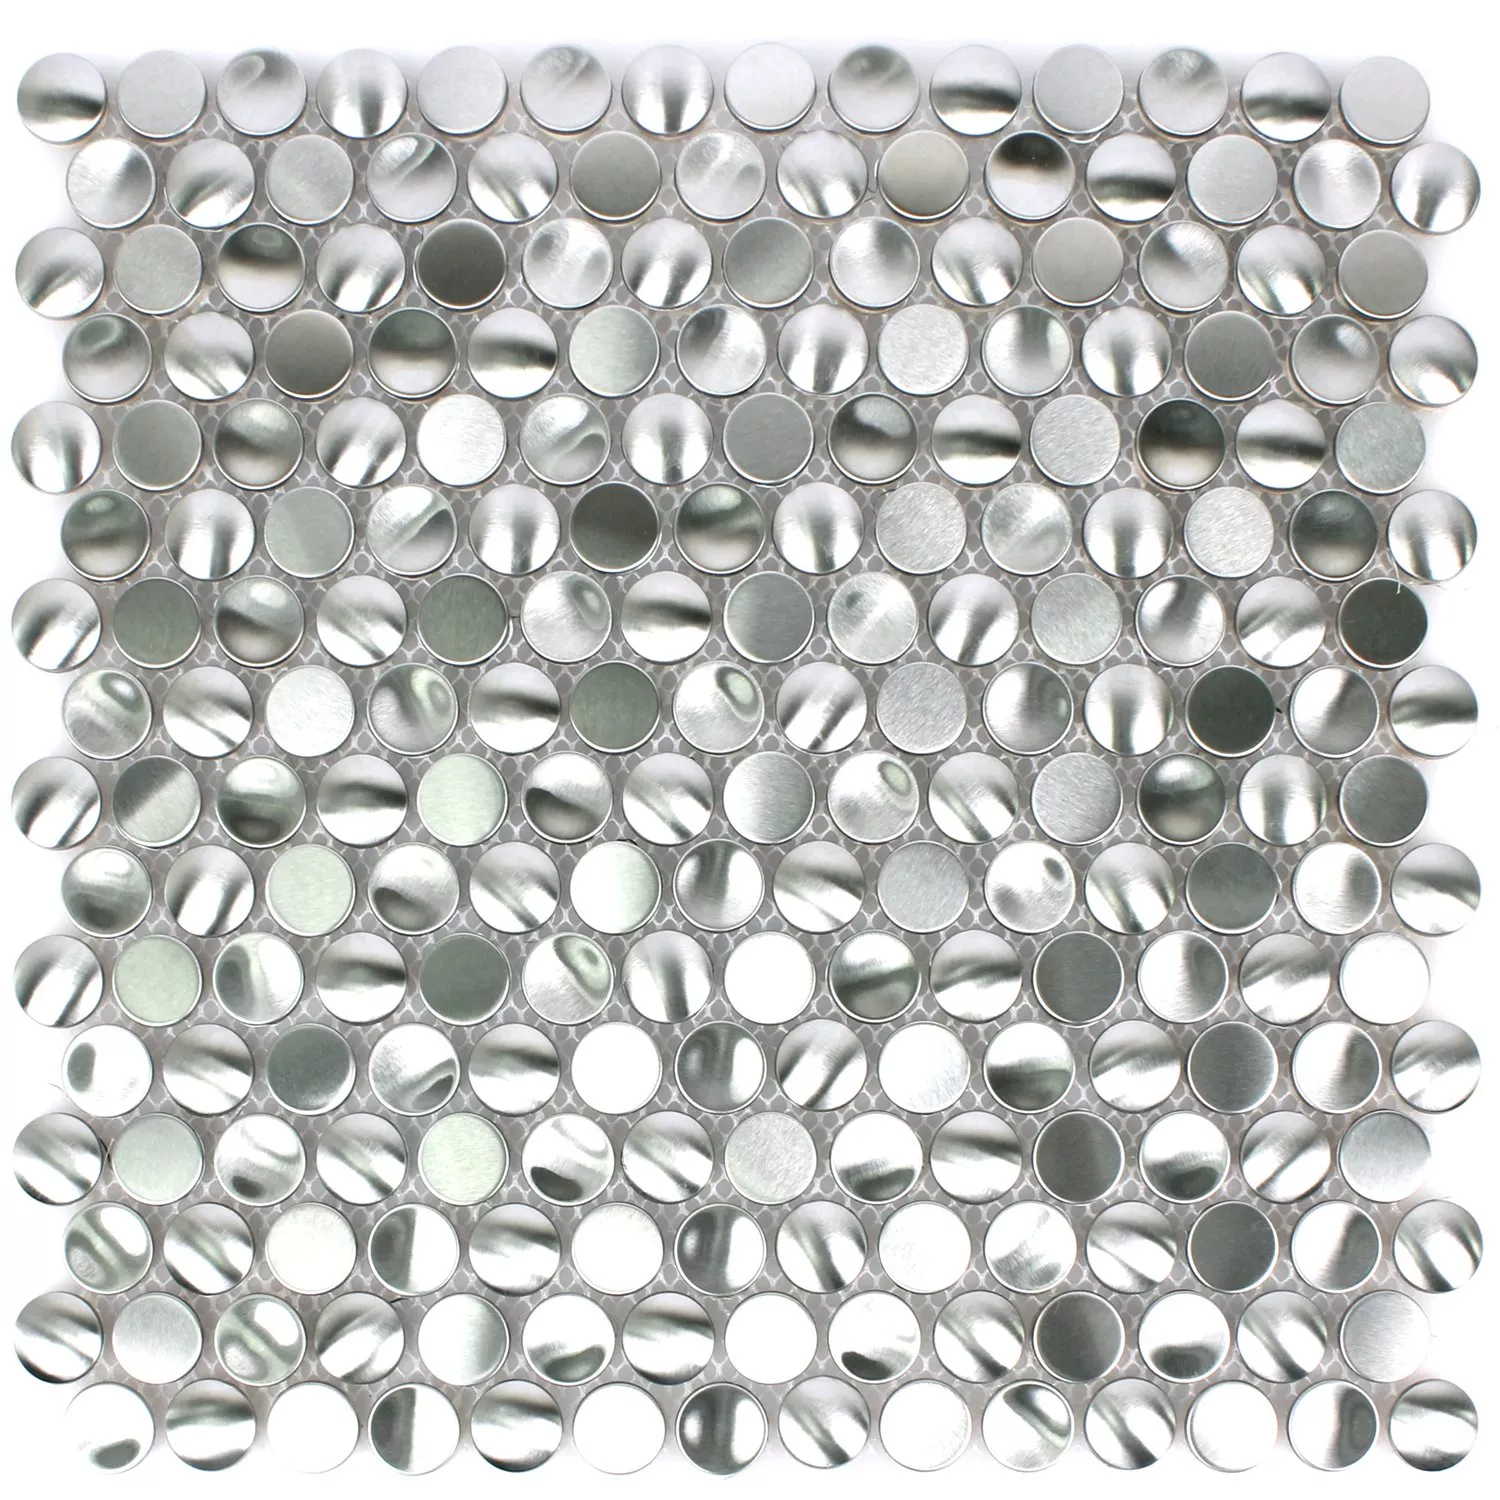 Mosaic Tiles Stainless Steel Celeus Silver Waved